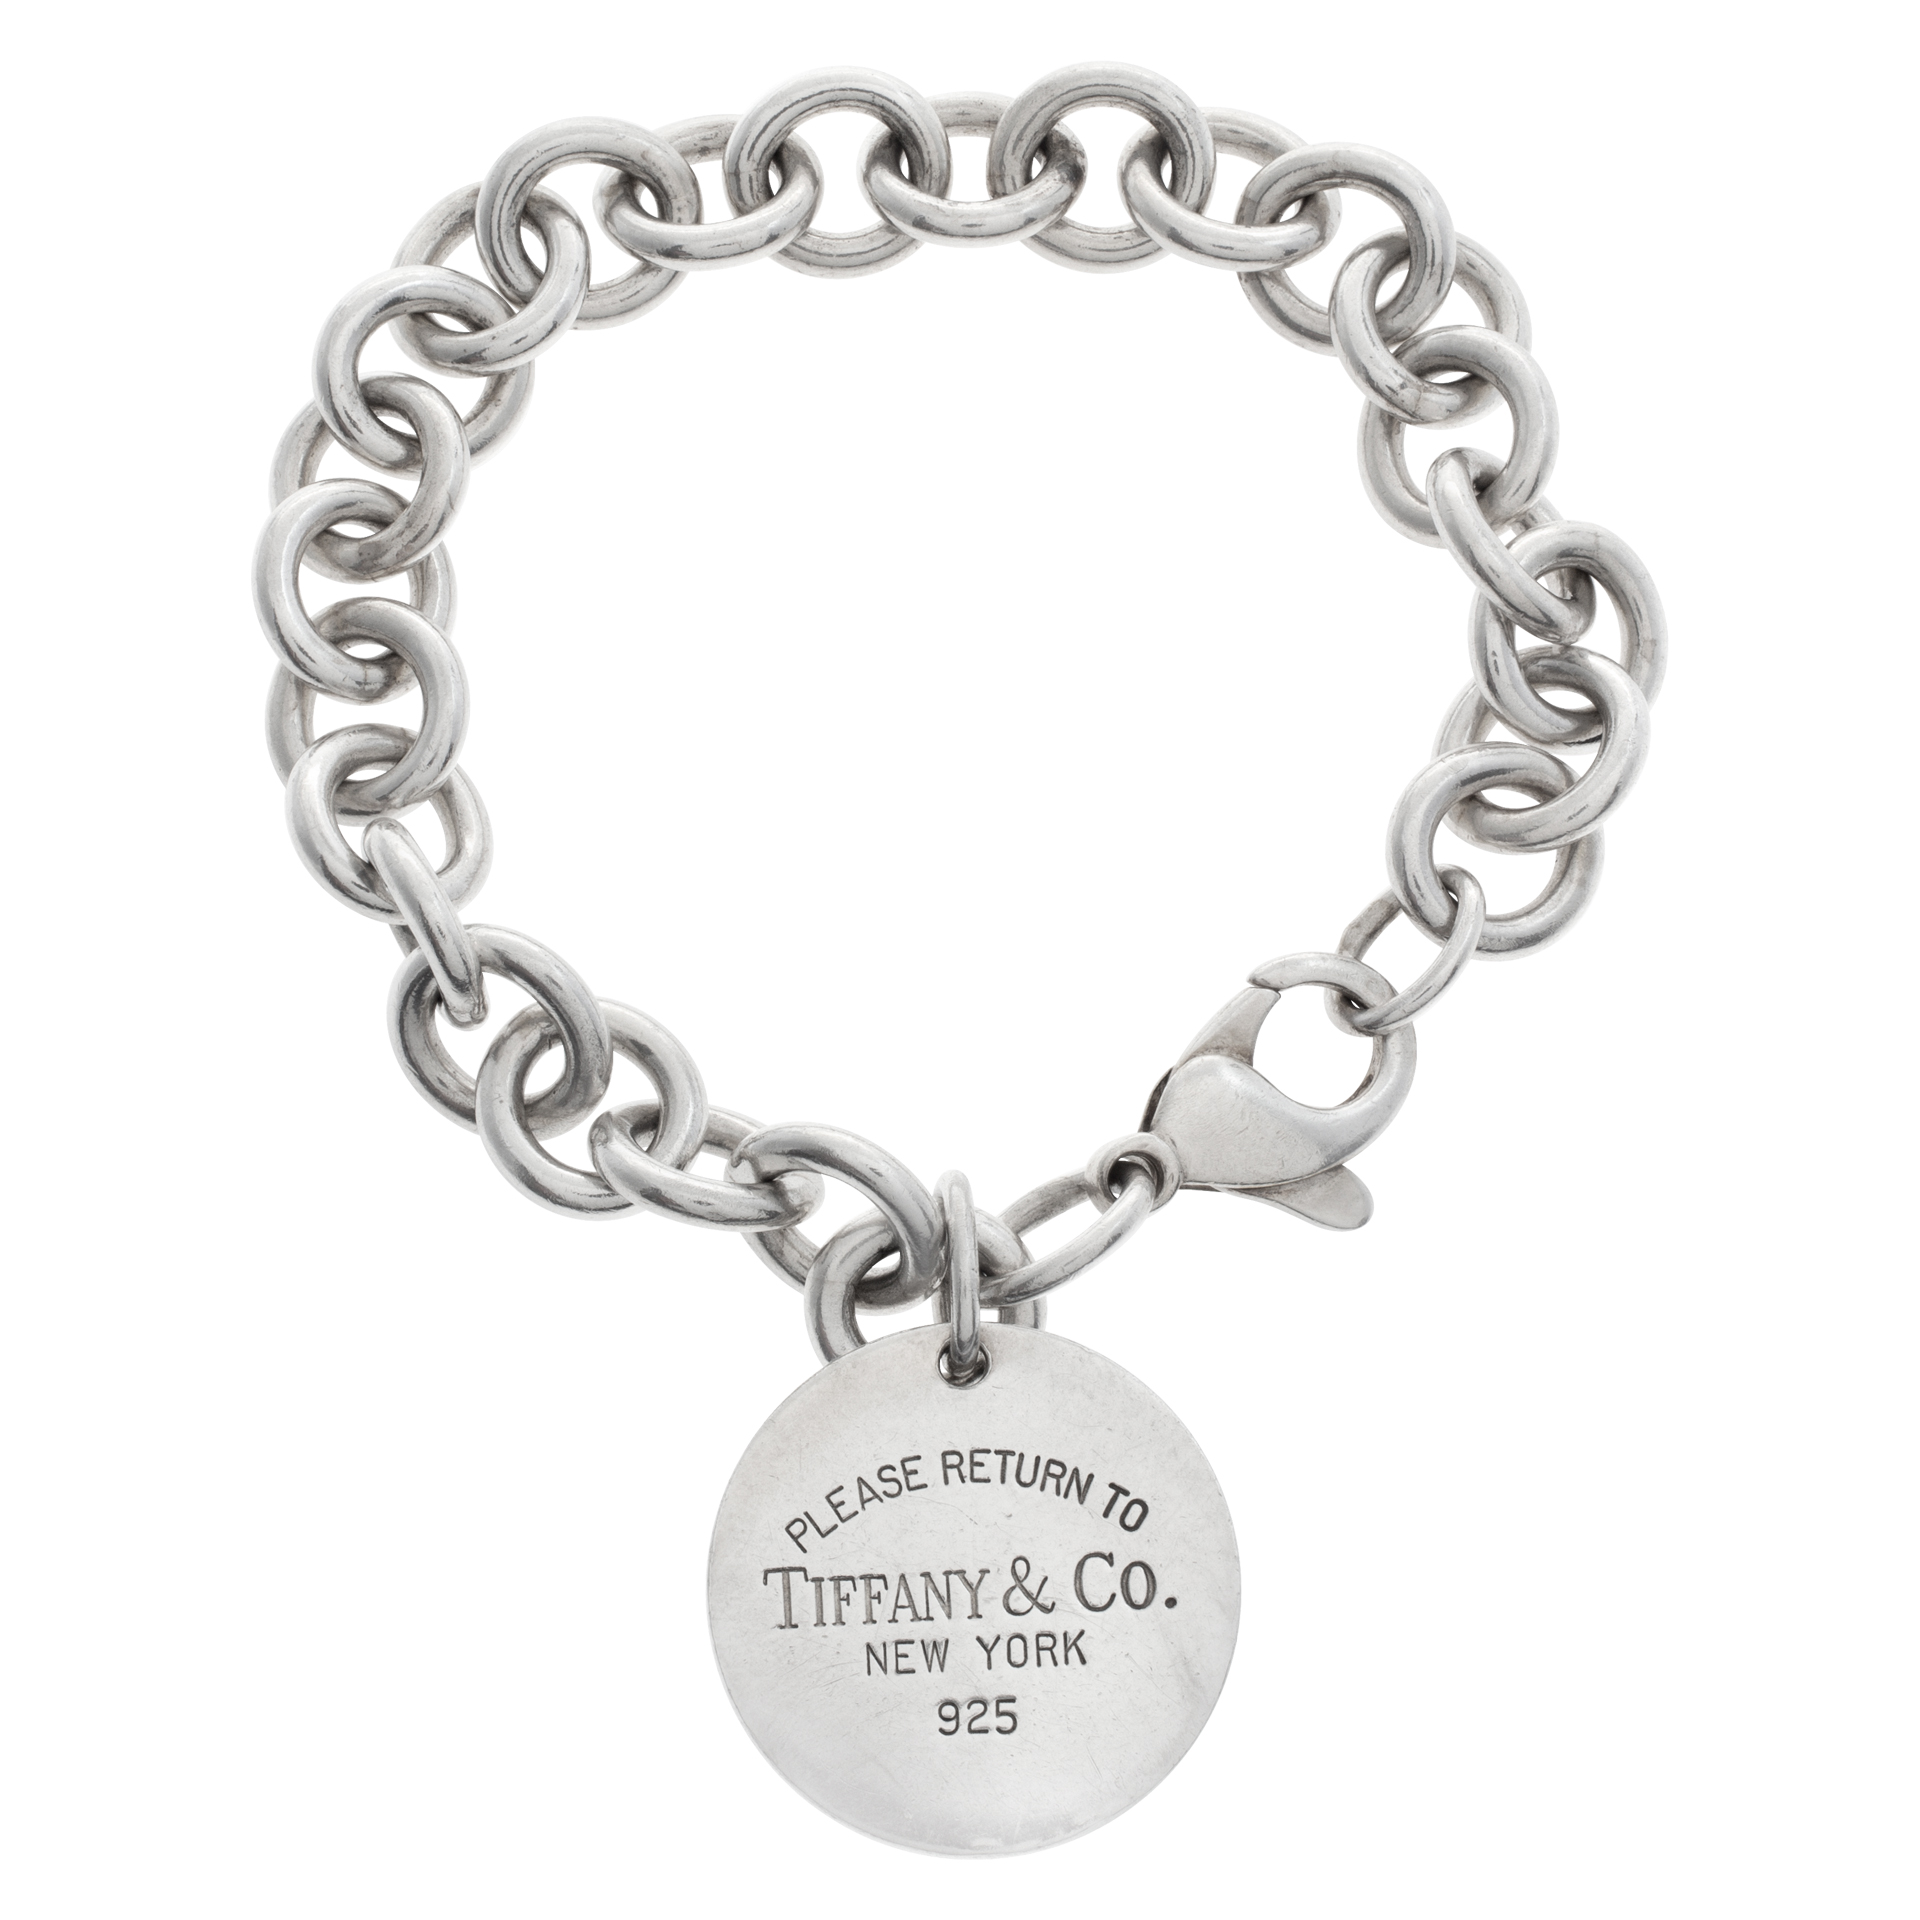 Tiffany & Co. Round Tag Bracelet In Sterling Silver image 1